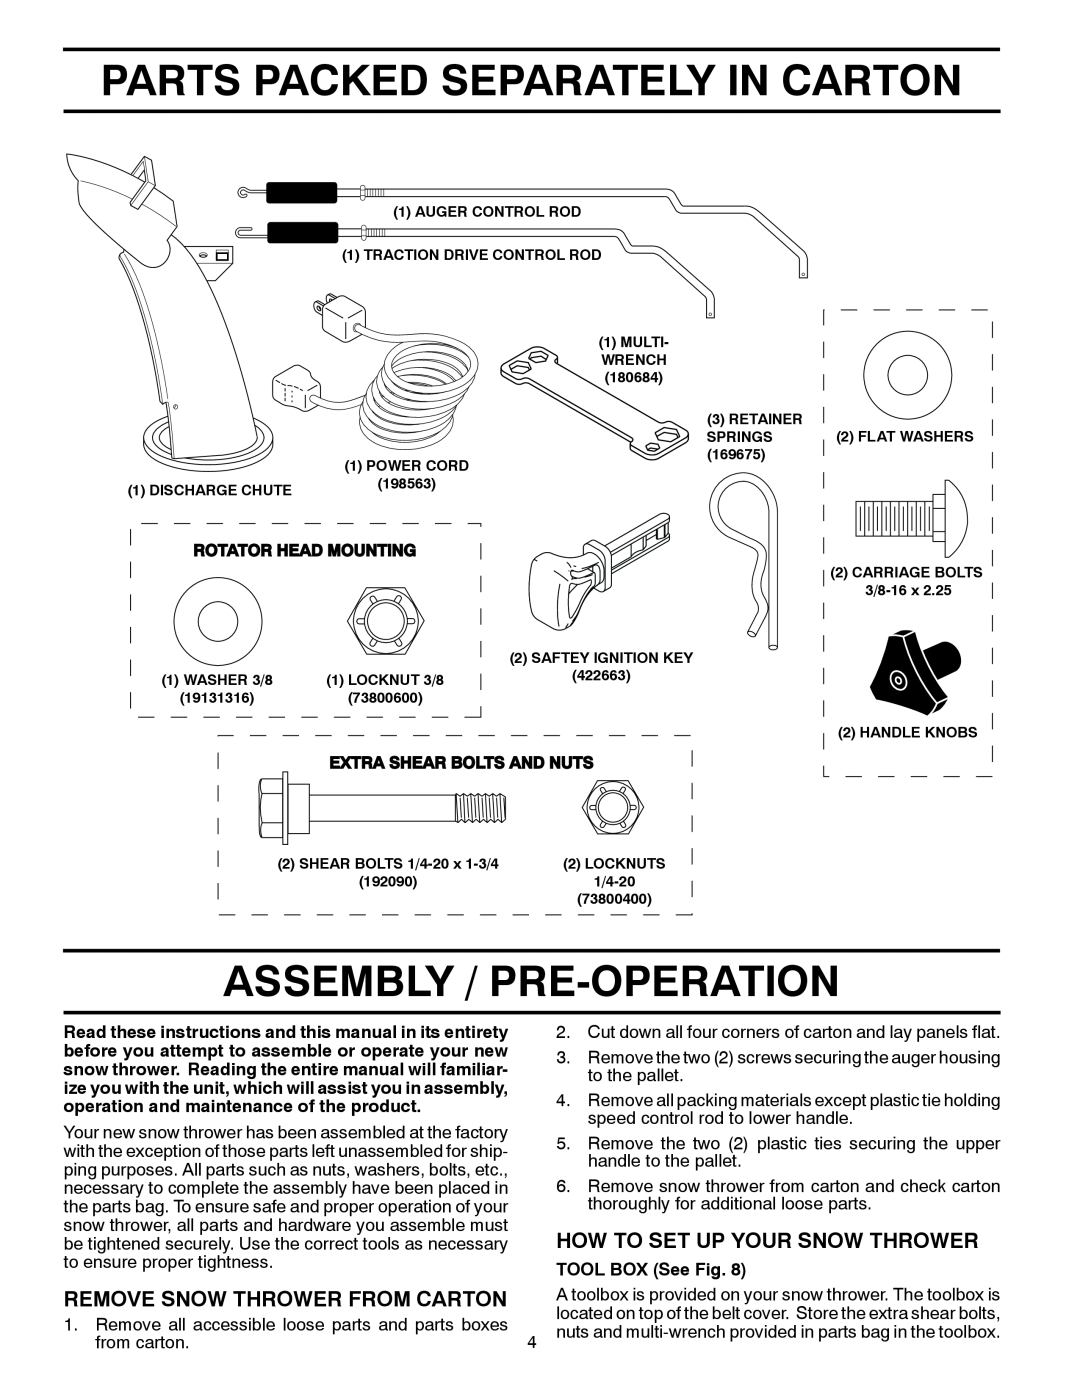 Husqvarna 924SB, 96193004500 Parts Packed Separately In Carton, Assembly / Pre-Operation, How To Set Up Your Snow Thrower 